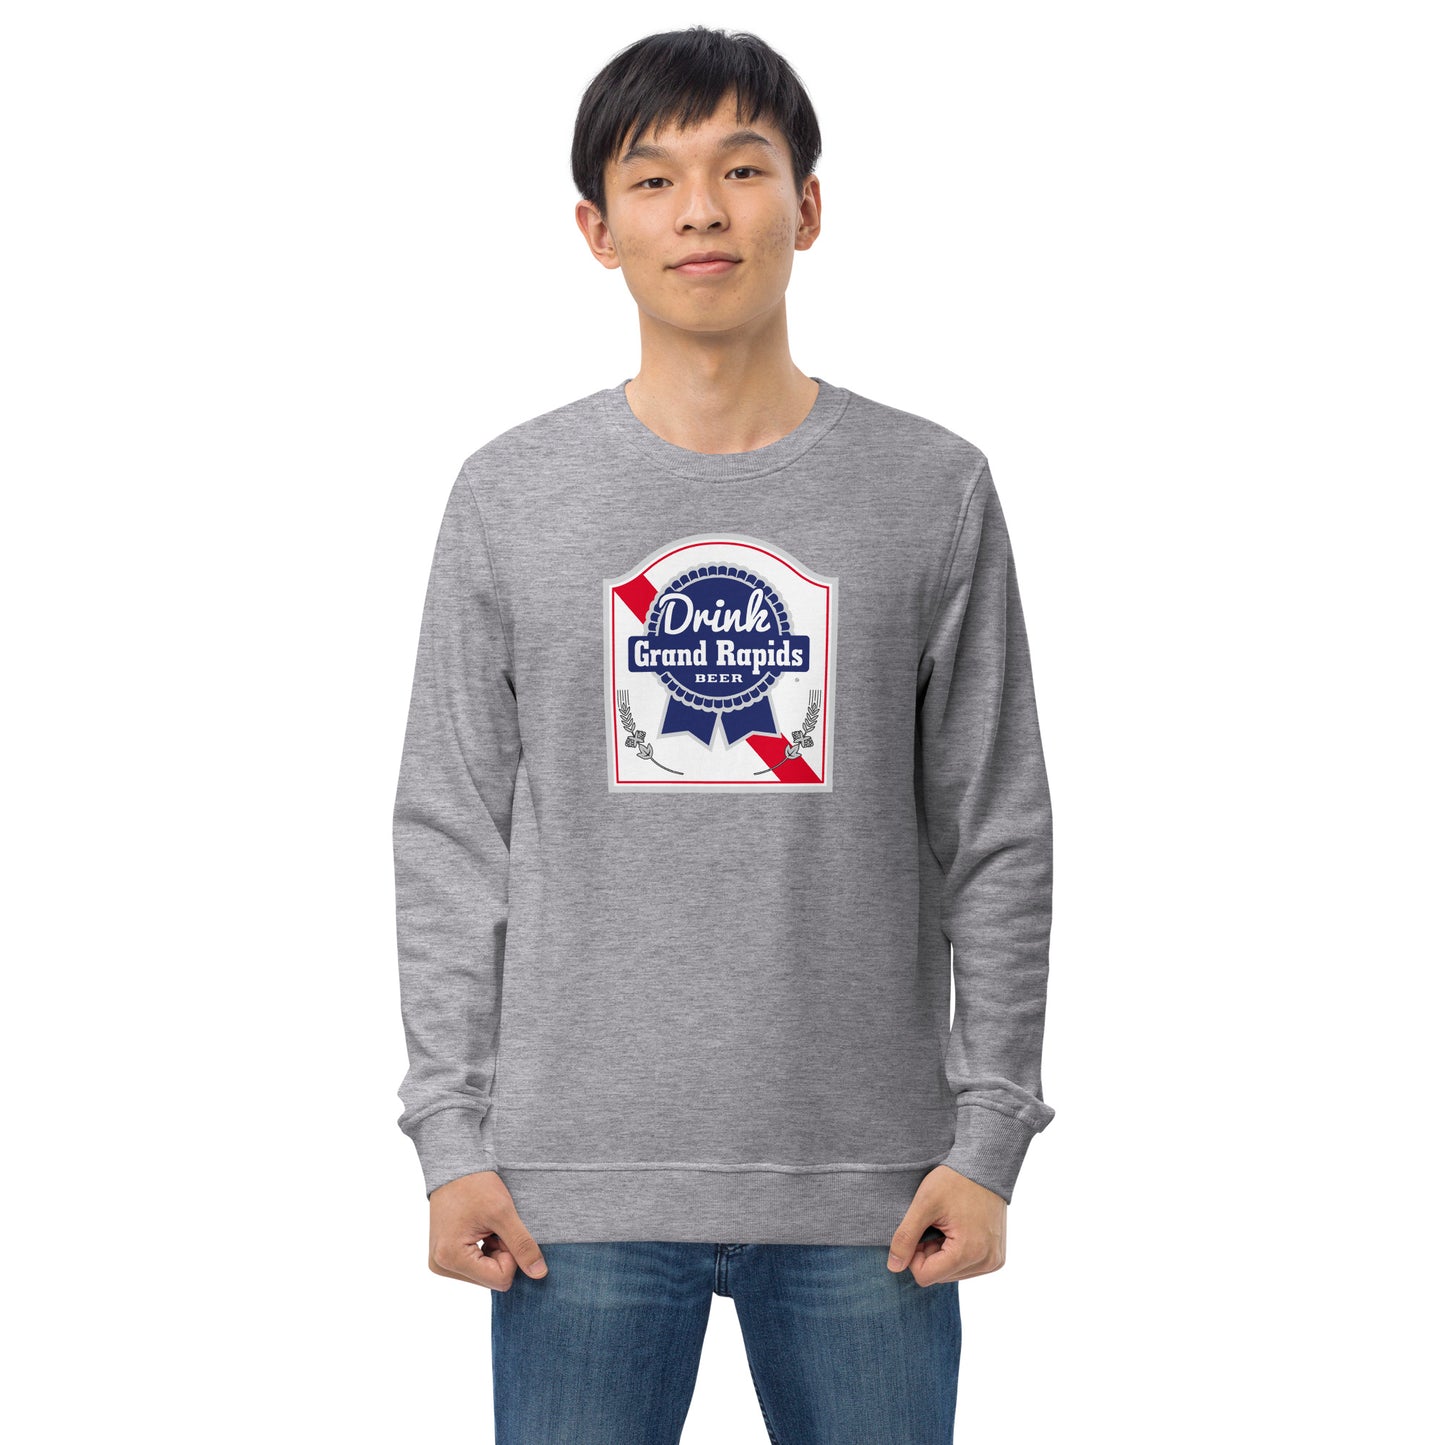 What You'll Have Sweatshirt